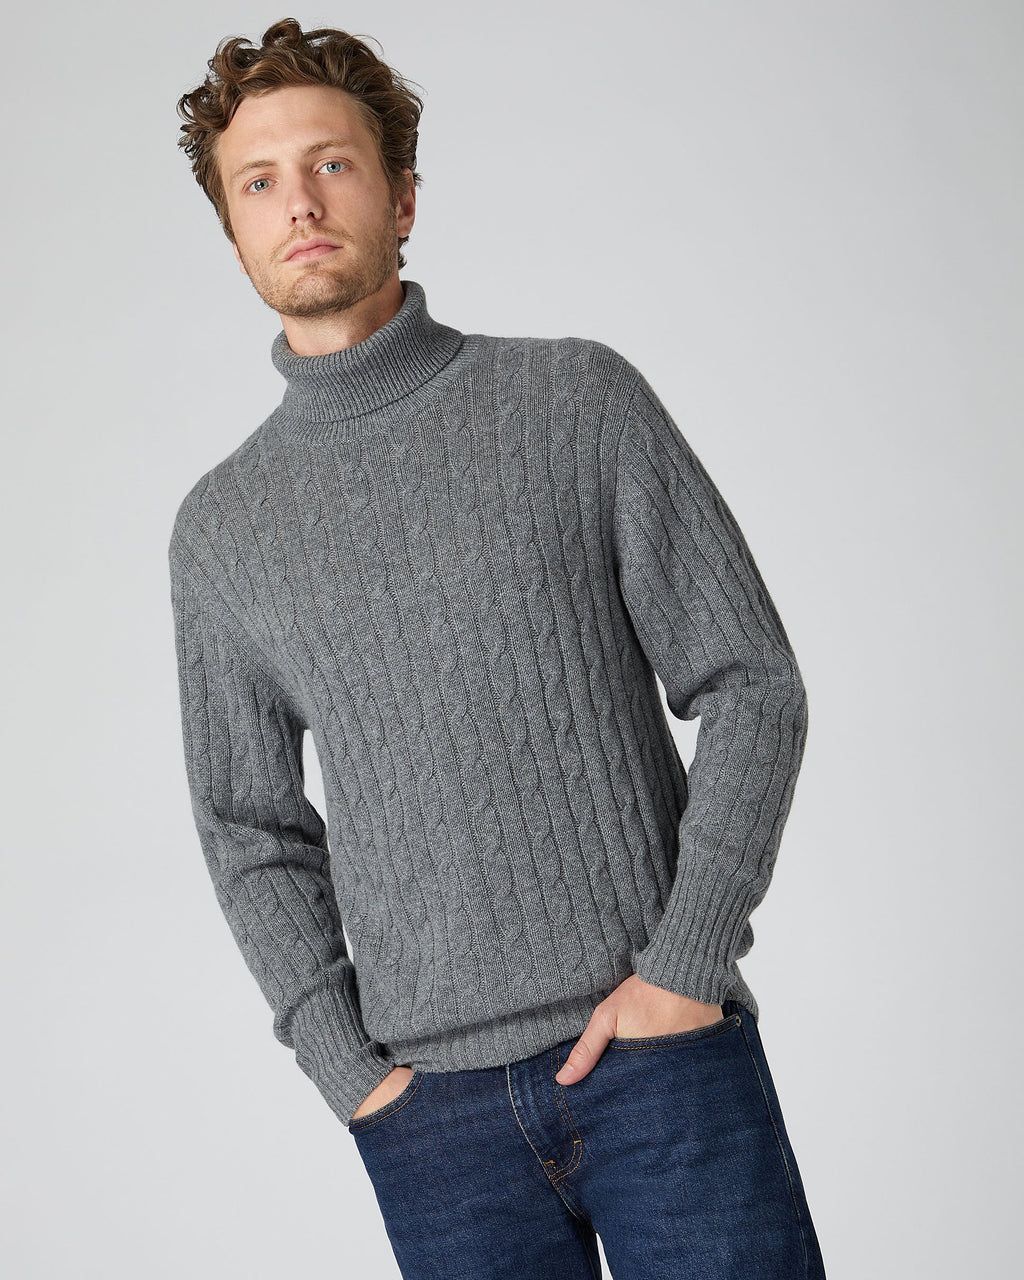 Men's Cashmere Roll Neck Sweaters, Free Delivery